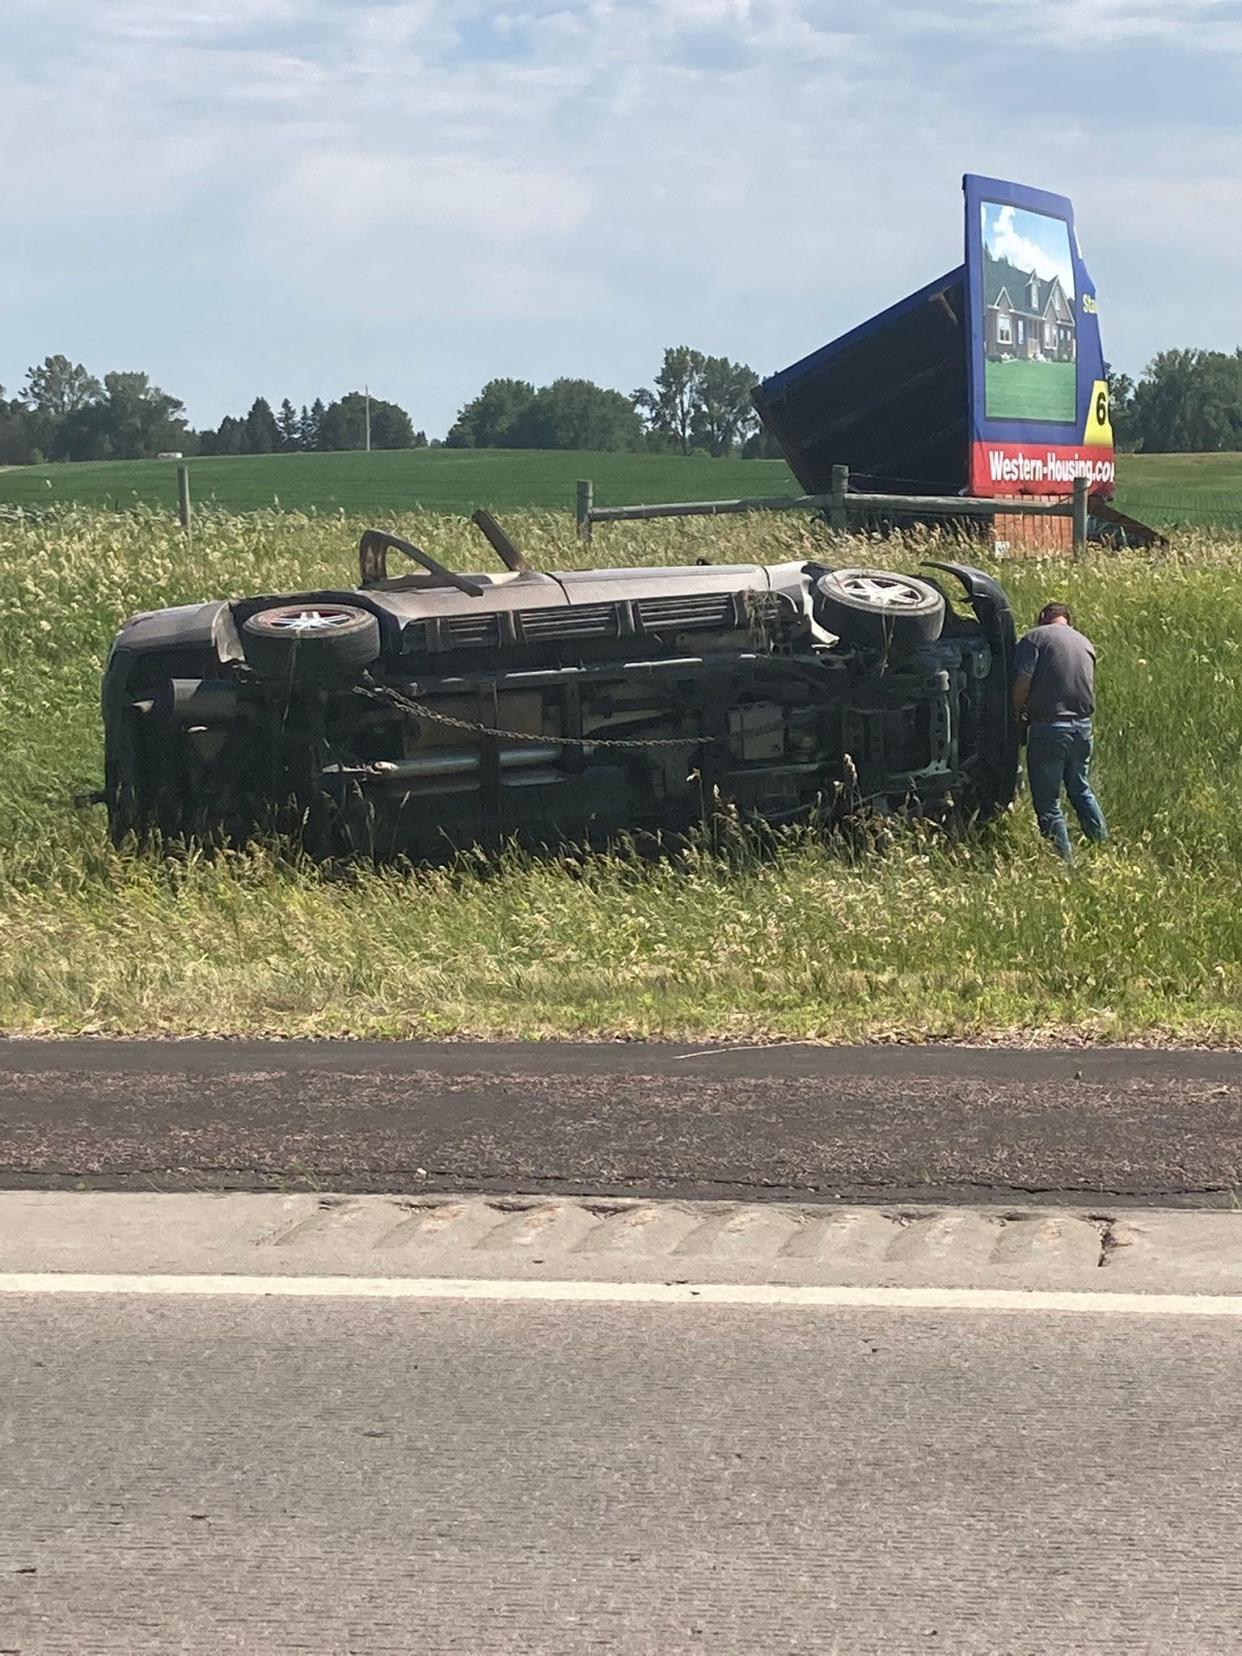 One person was seriously injured after a crash on Interstate 90 five miles west of Sioux Falls on June 29, 2022.